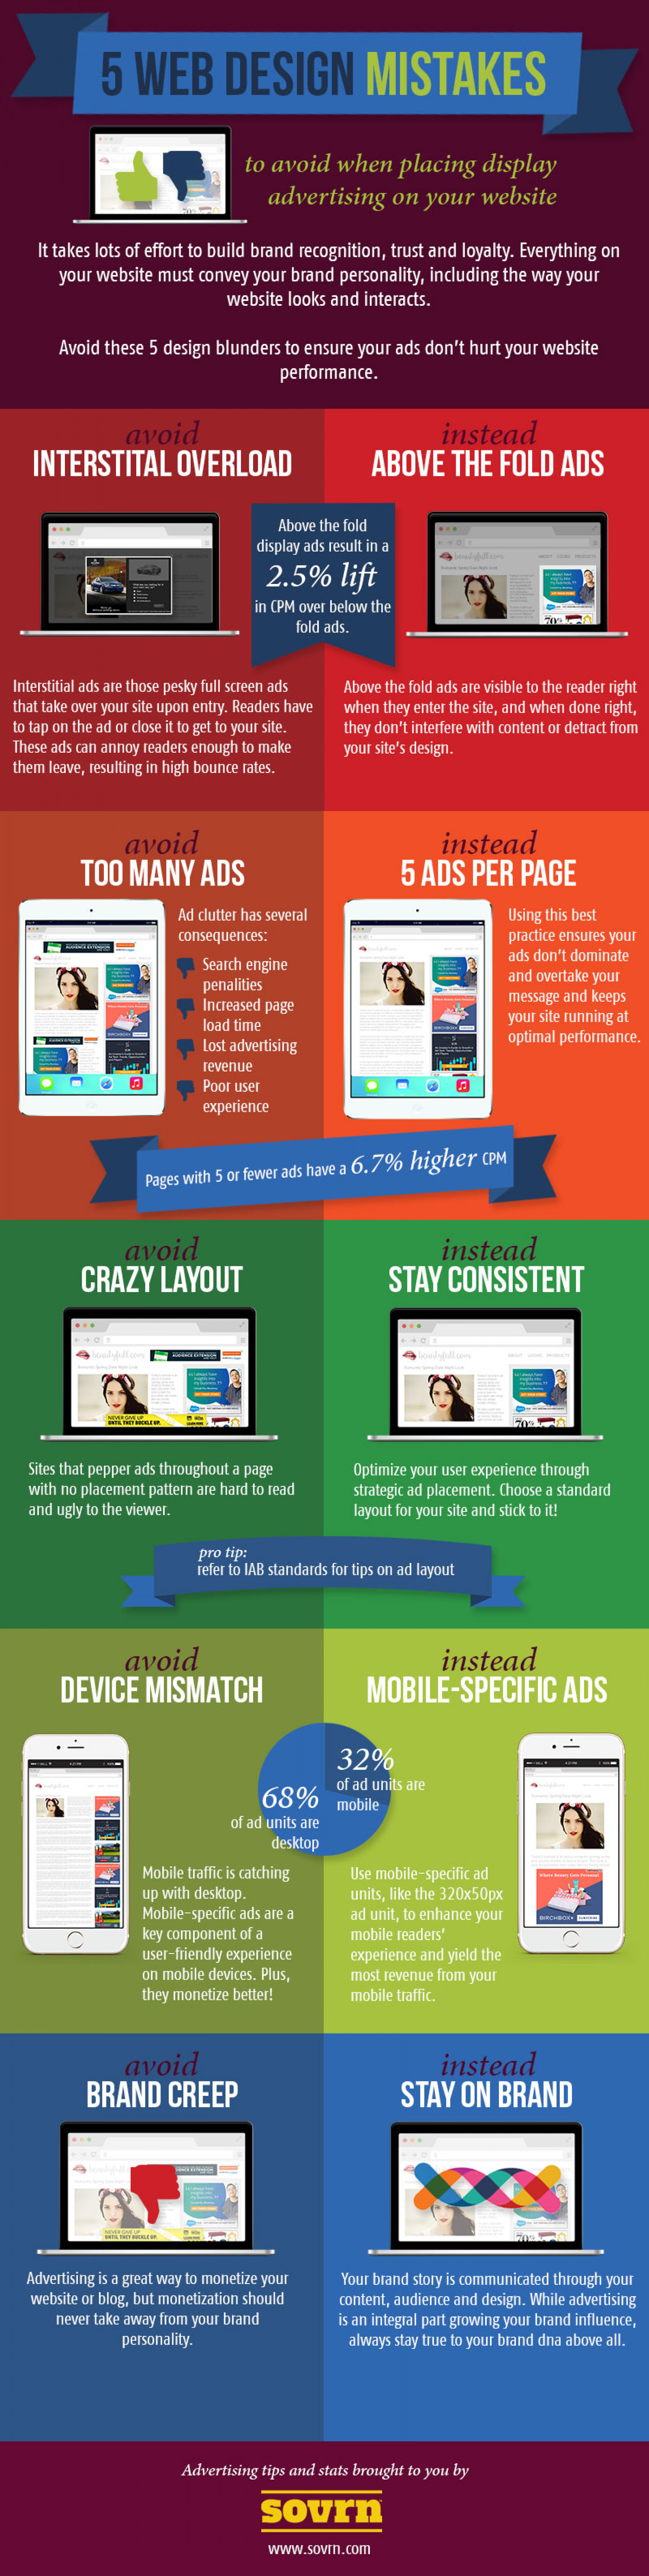 5 Display Advertising Mistakes That Hurt Your Web Design Infographic